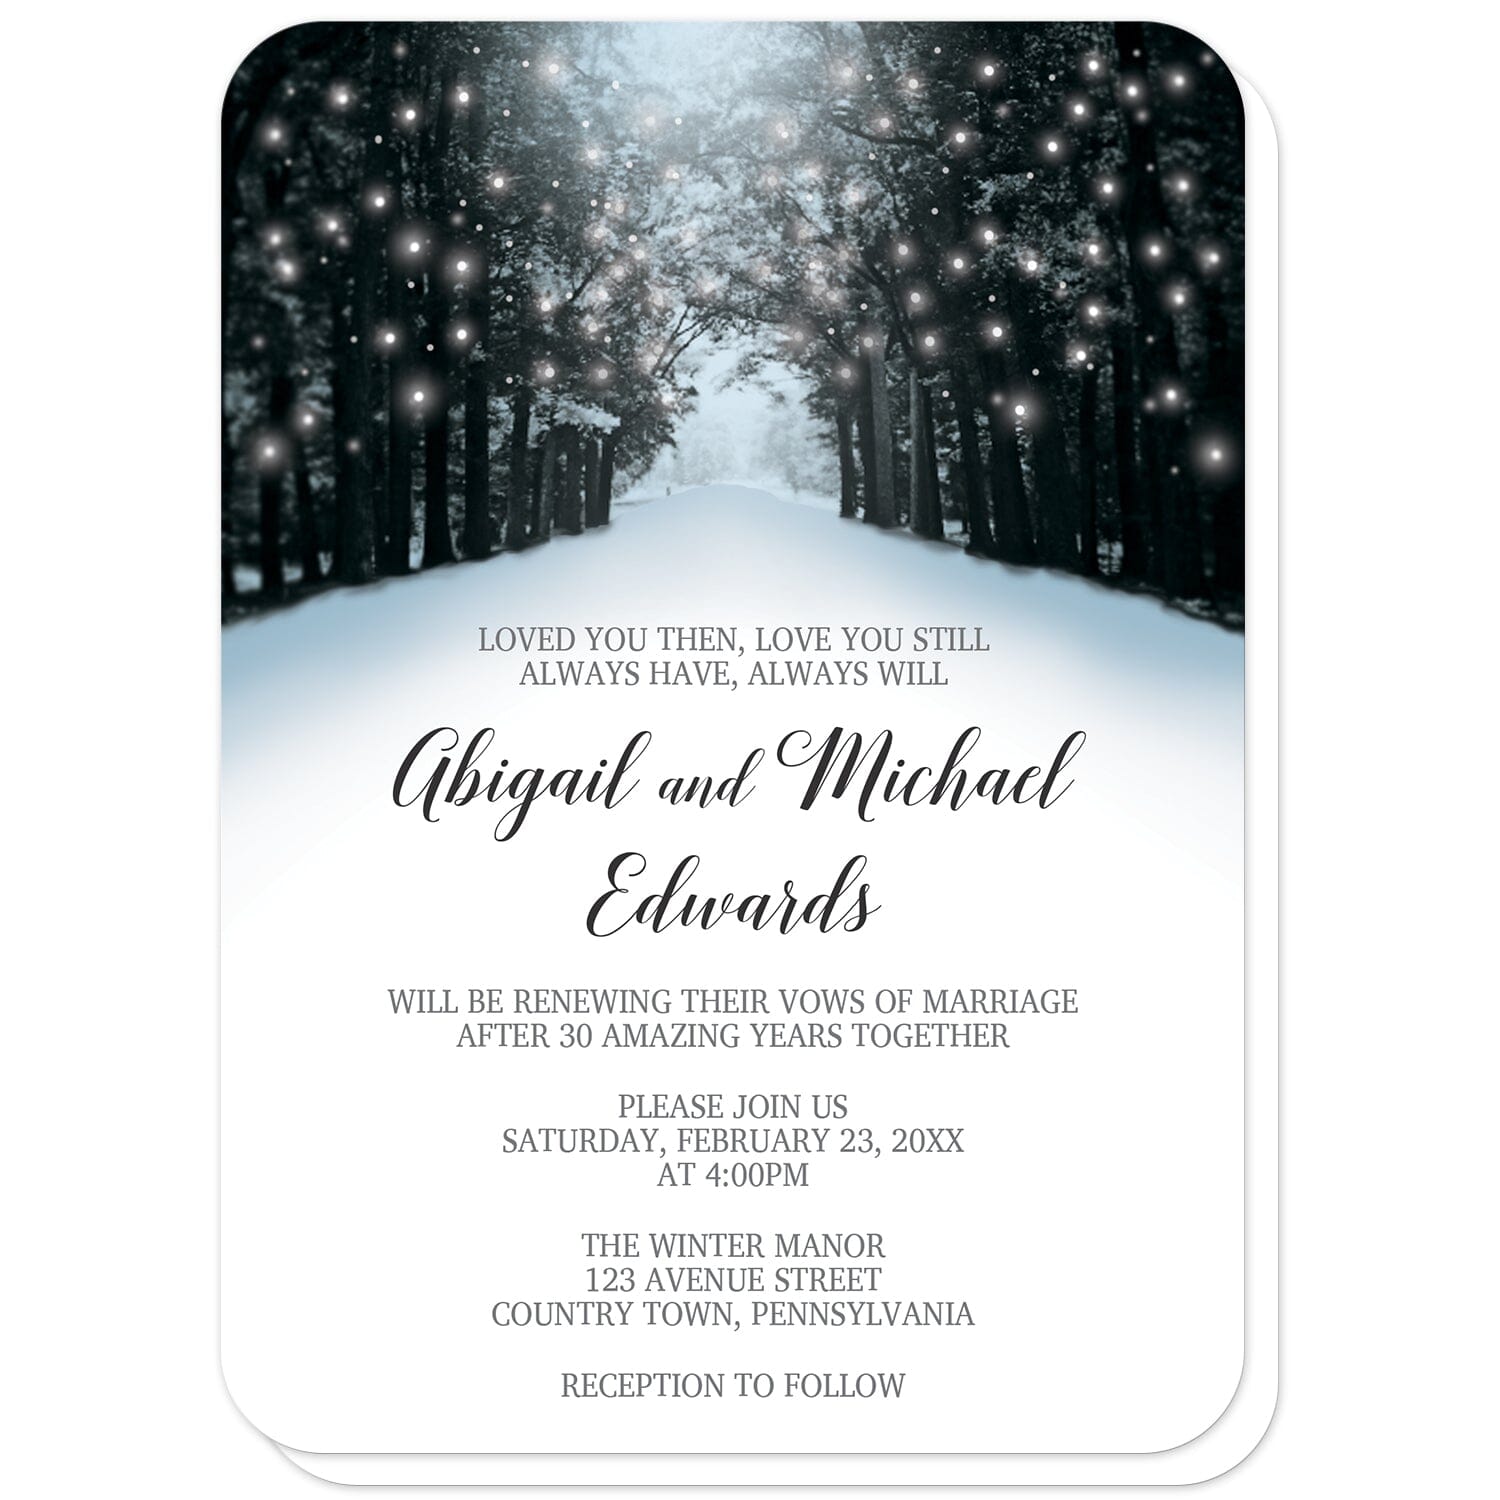 Snowy Winter Road Tree Lights Vow Renewal Invitations (with rounded corners) at Artistically Invited. Beautiful snowy winter road tree lights vow renewal invitations with a snowy tree lined road filled with white holiday lights. They're designed in a blue, black, and gray winter color scheme with a winter wonderland theme. Your personalized vow renewal details are custom printed in black and gray over a snow white background below the snowy road design.